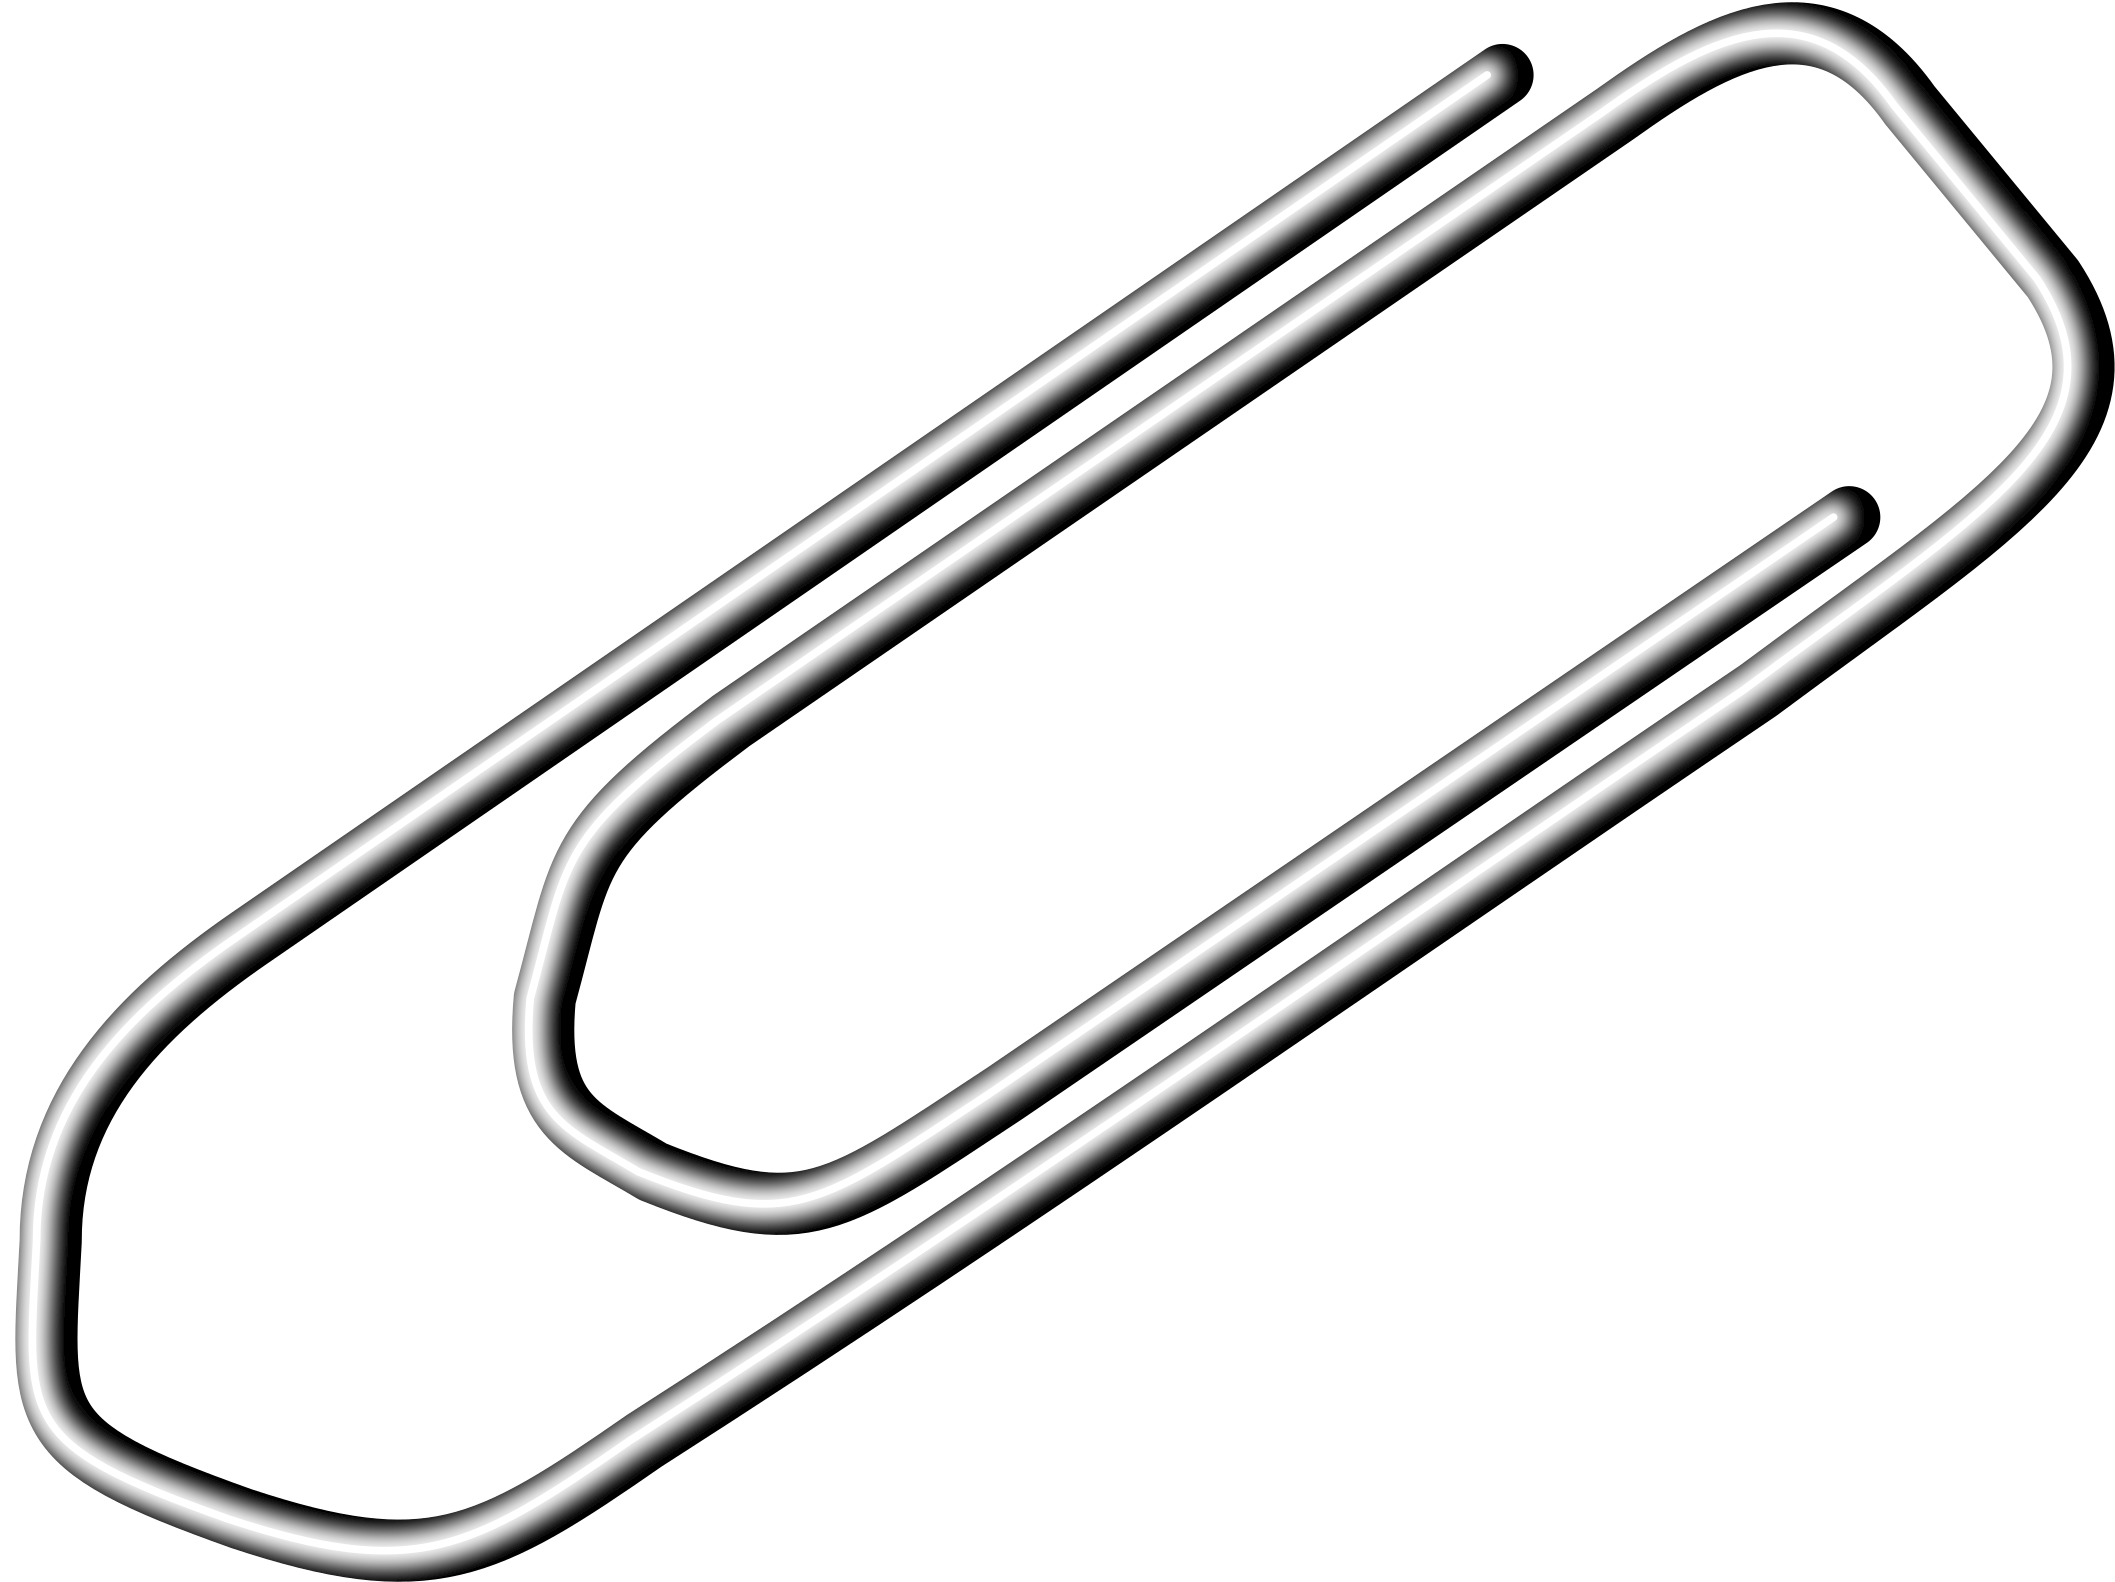 A White Paper Clip On A Black Background